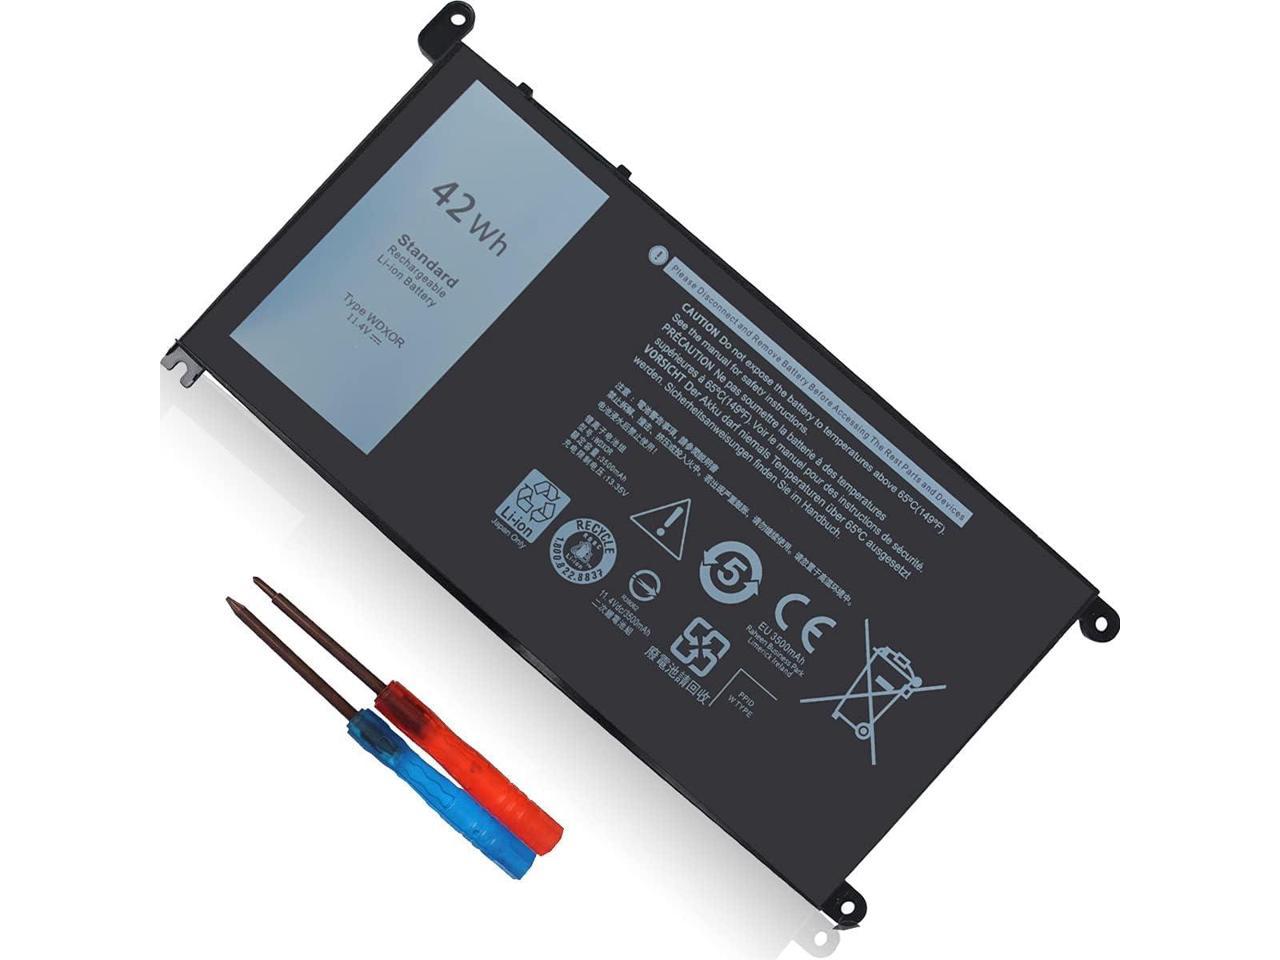 DELL WDX0R Notebook Battery 11.4V 42WH for Dell Inspiron 5368 5378 5379 5565 5567 5568 5570 5578 5579 5765 5767 7368 7378 7560 7569 7570 7573 7579 7580 Best OEM Quality 